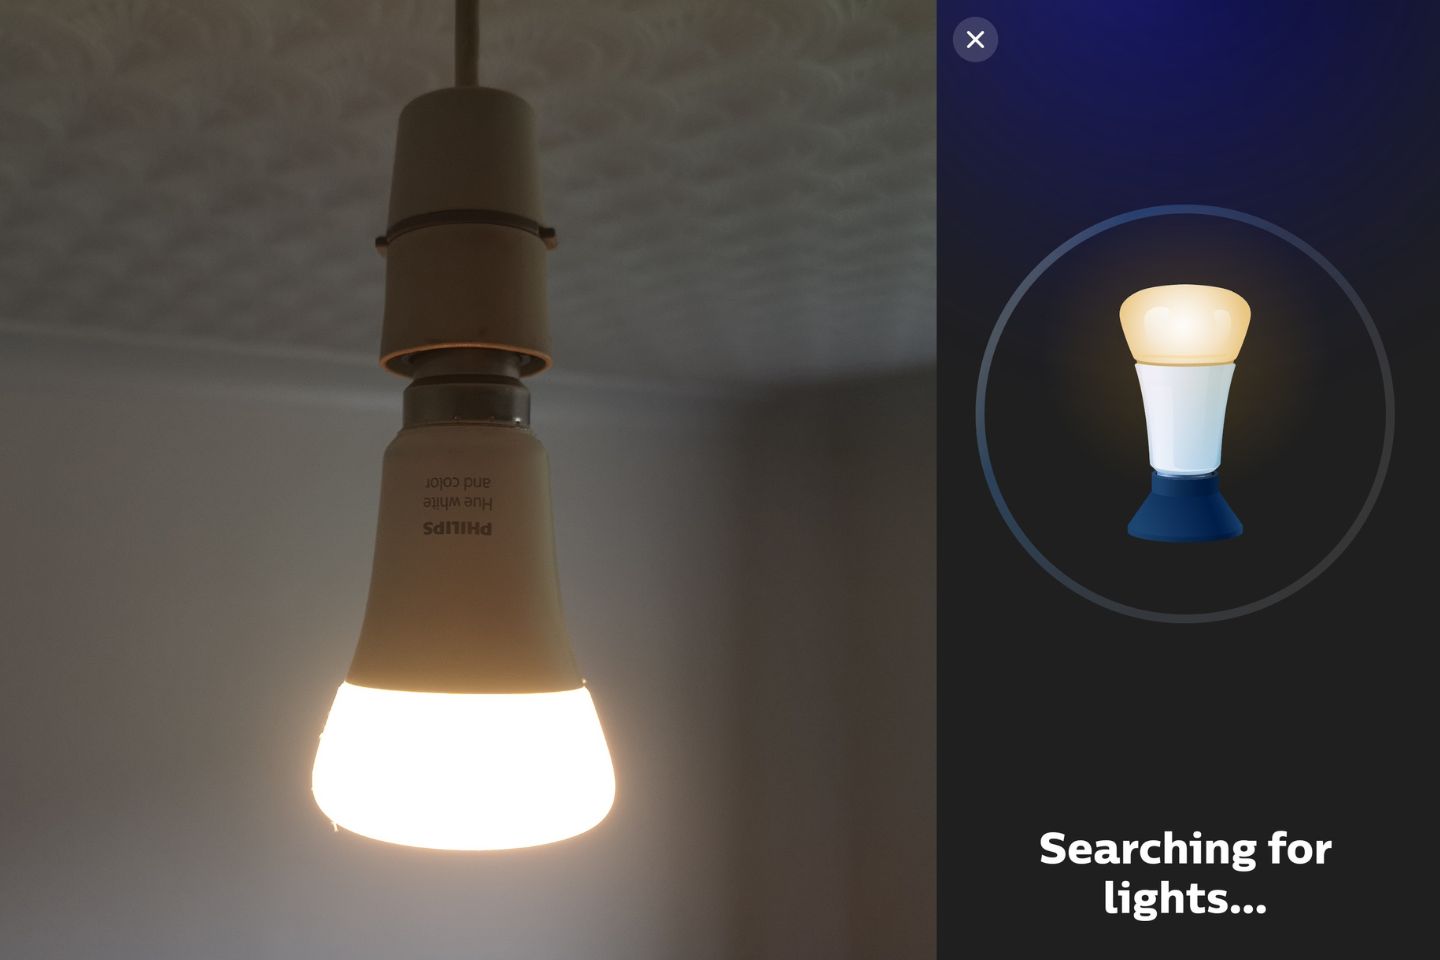 collage of lighted smart bulb and a screenshot of smart lighting app searching lights to connect with